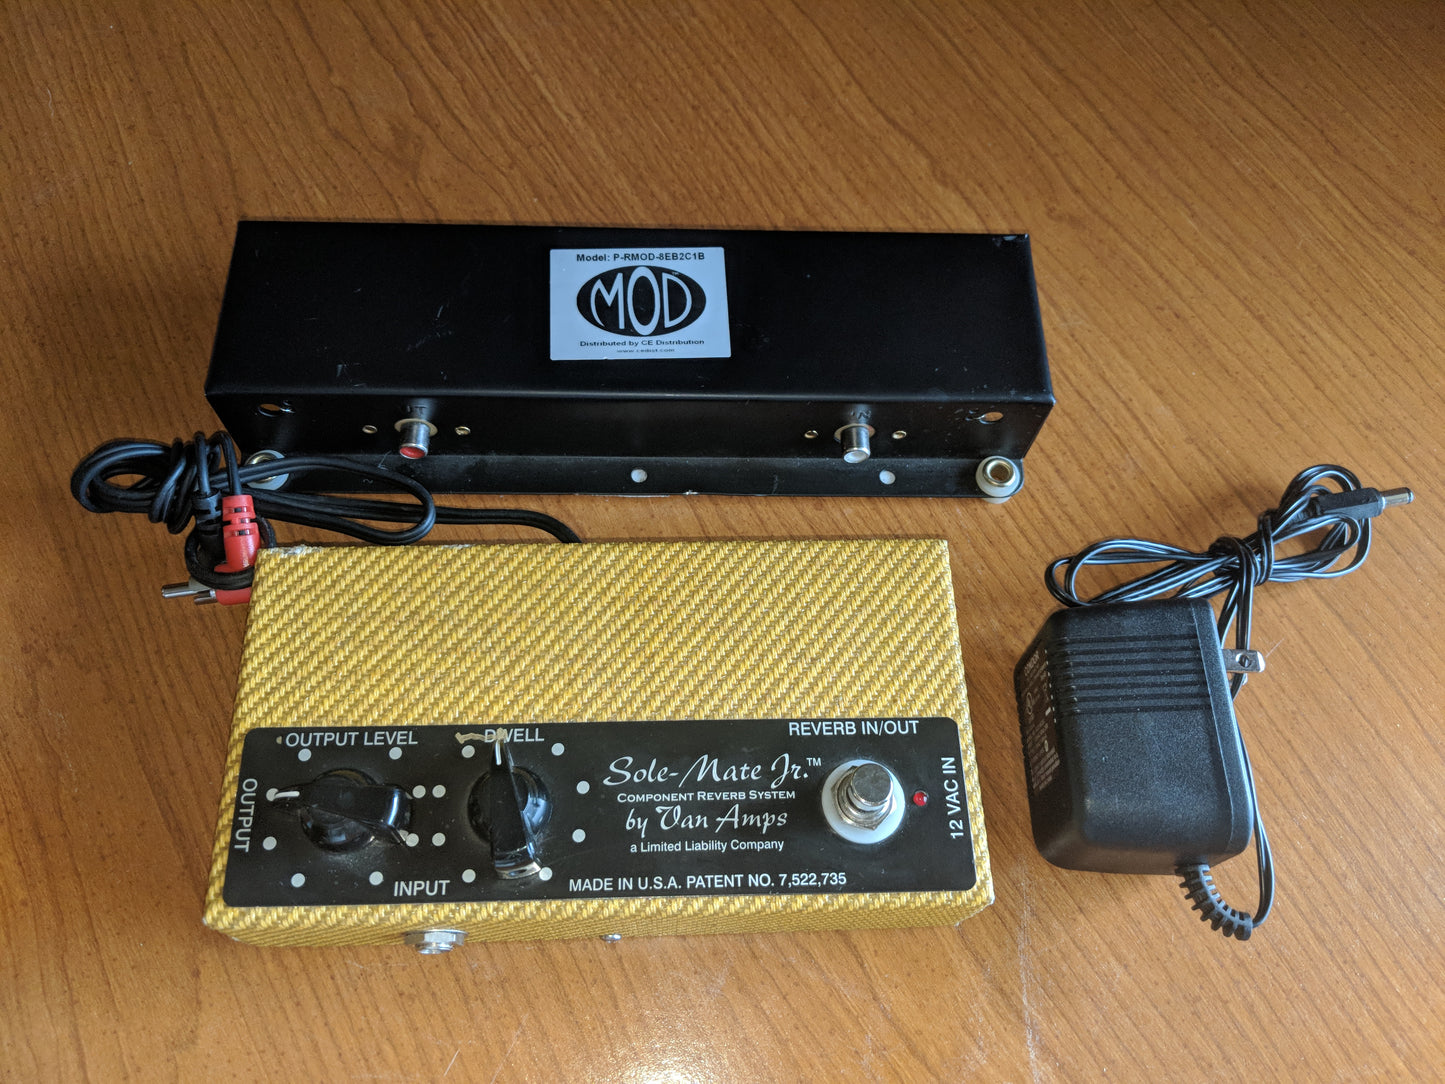 Used Van Amps Sole-Mate Jr. Component Reverb System Pedal (Tweed)